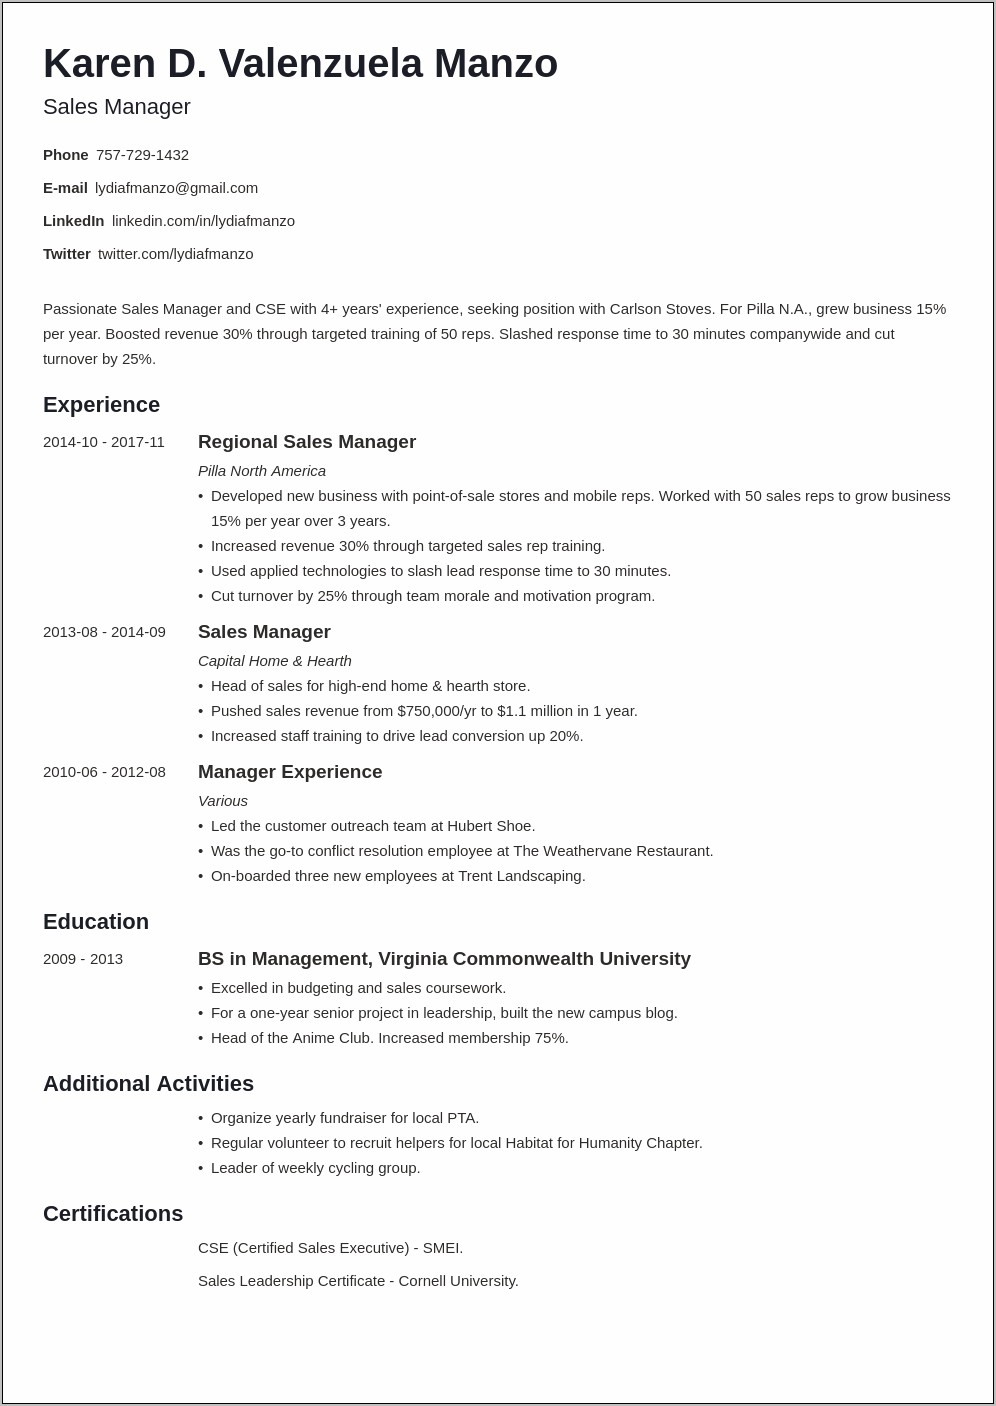 Resume Sample To Become Hiring Manager